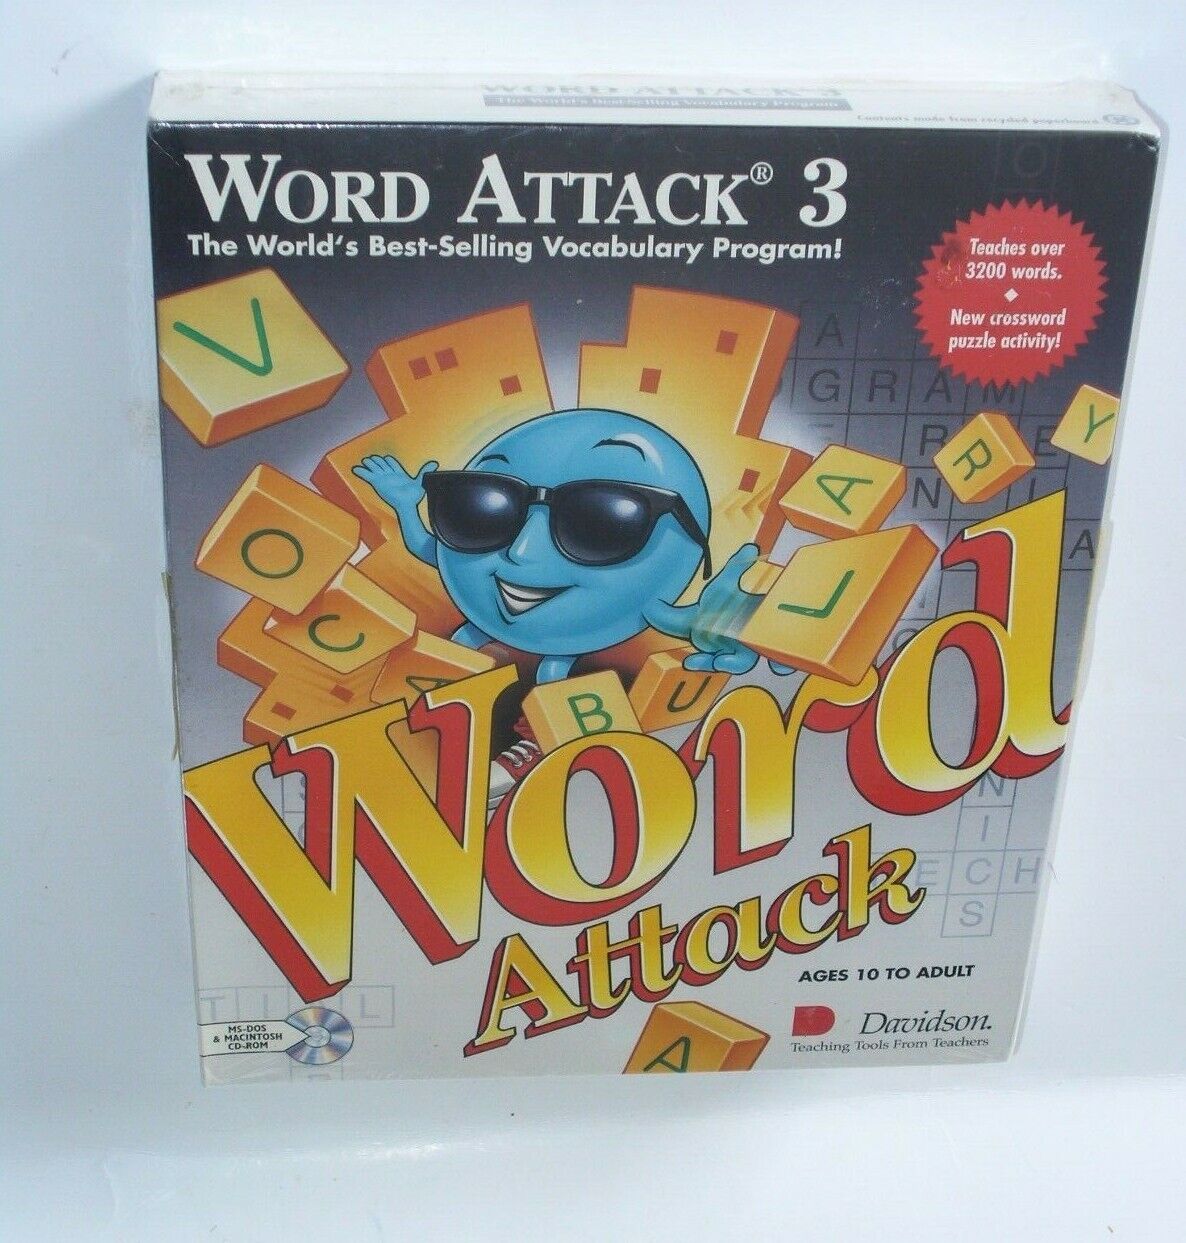 Word Attack 3 PC Game  (Collectors Piece) VINTAGE NEW OLD STOCK